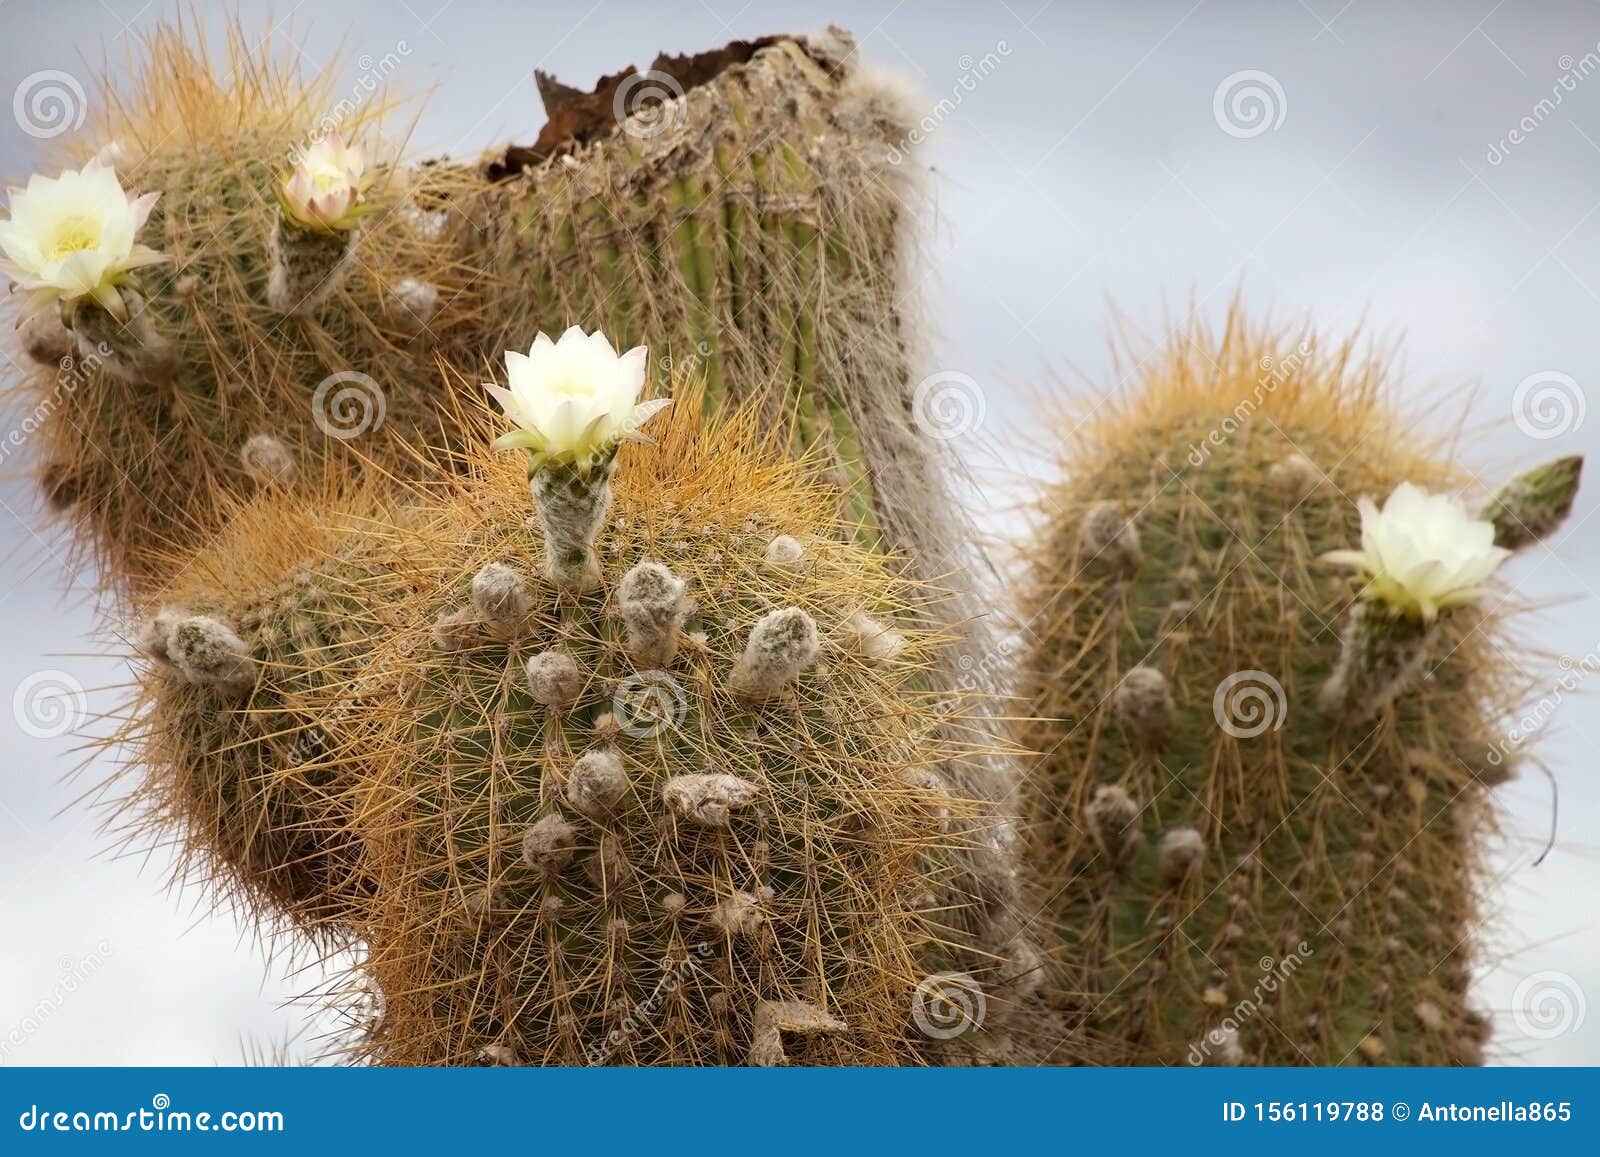 Flowers of the Cardon Cactus at the Los Cardones National Park ...